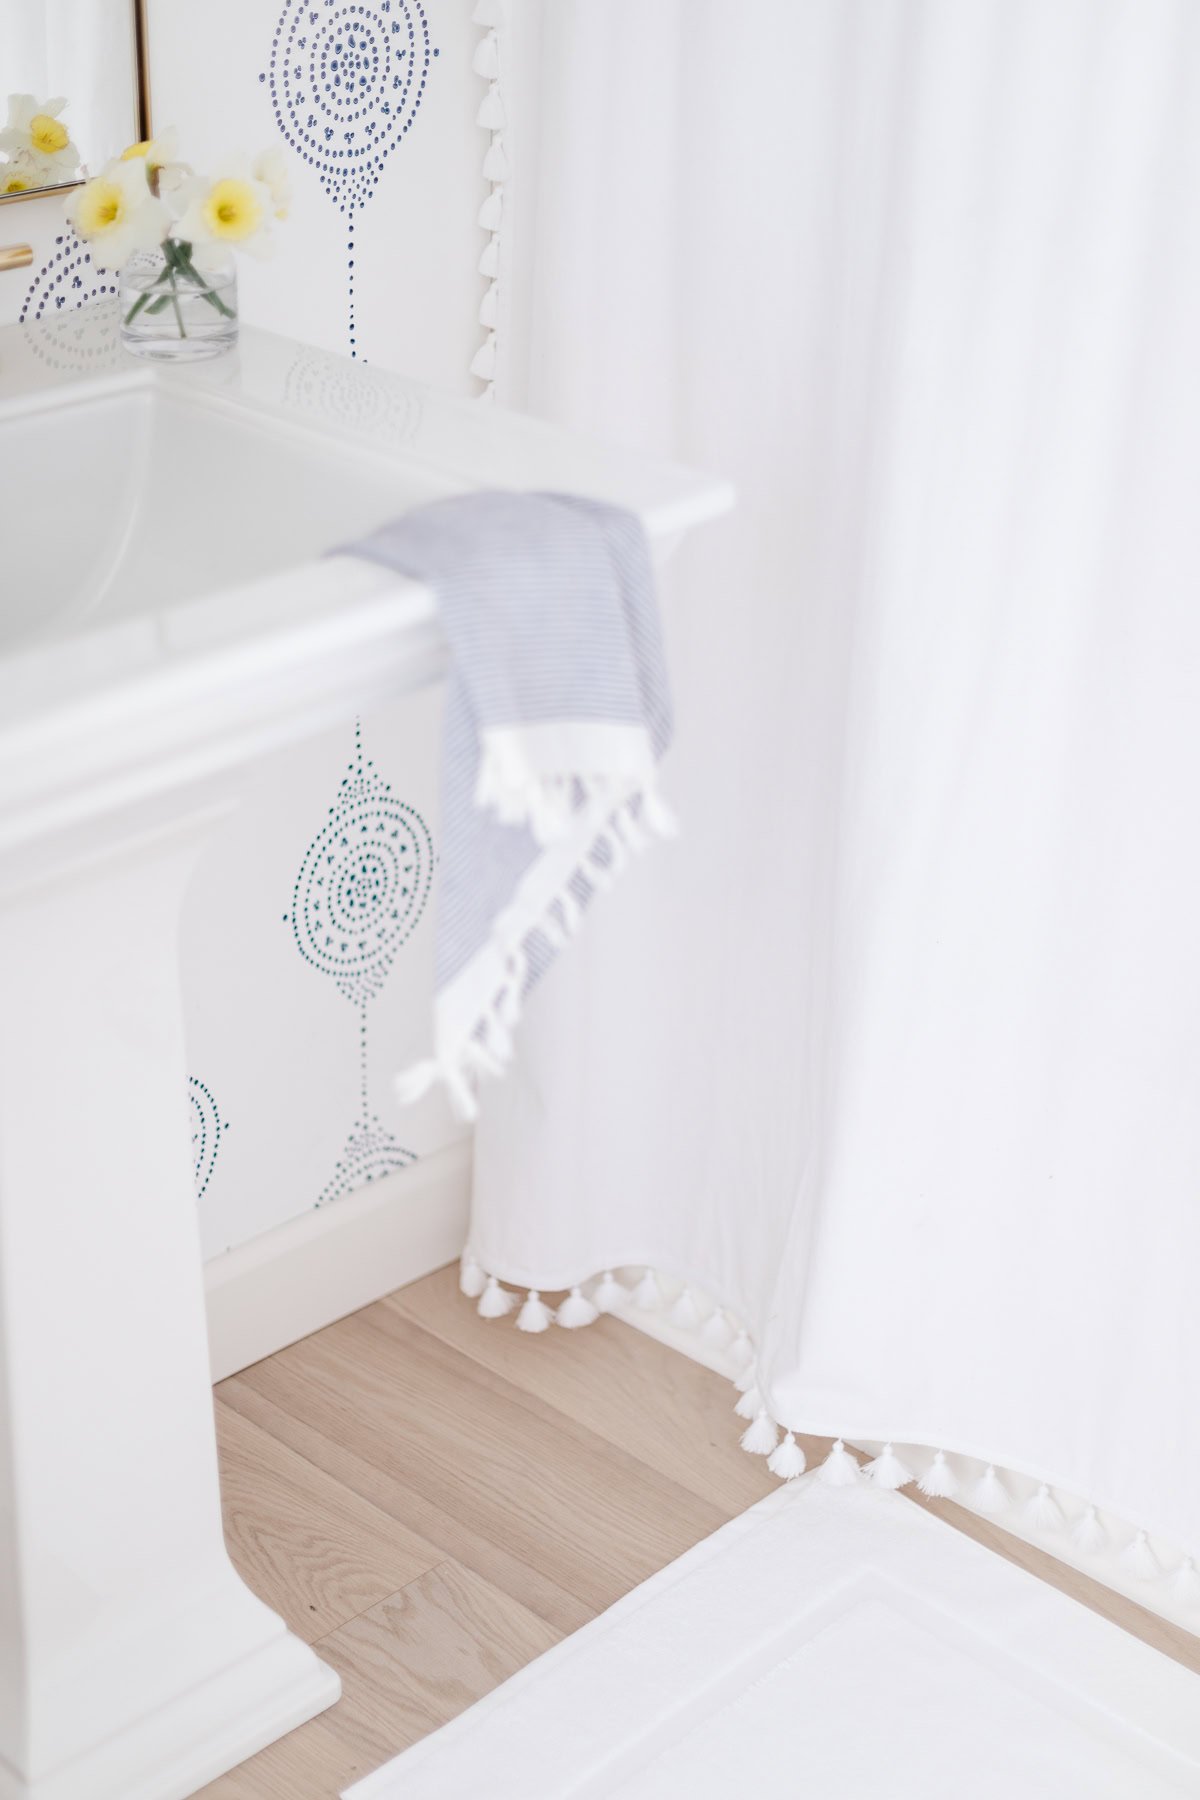 A bathroom with white oak floors, a white sink, blue and white striped hand towel, white shower curtain with tassels, and a small vase of yellow flowers on the counter.